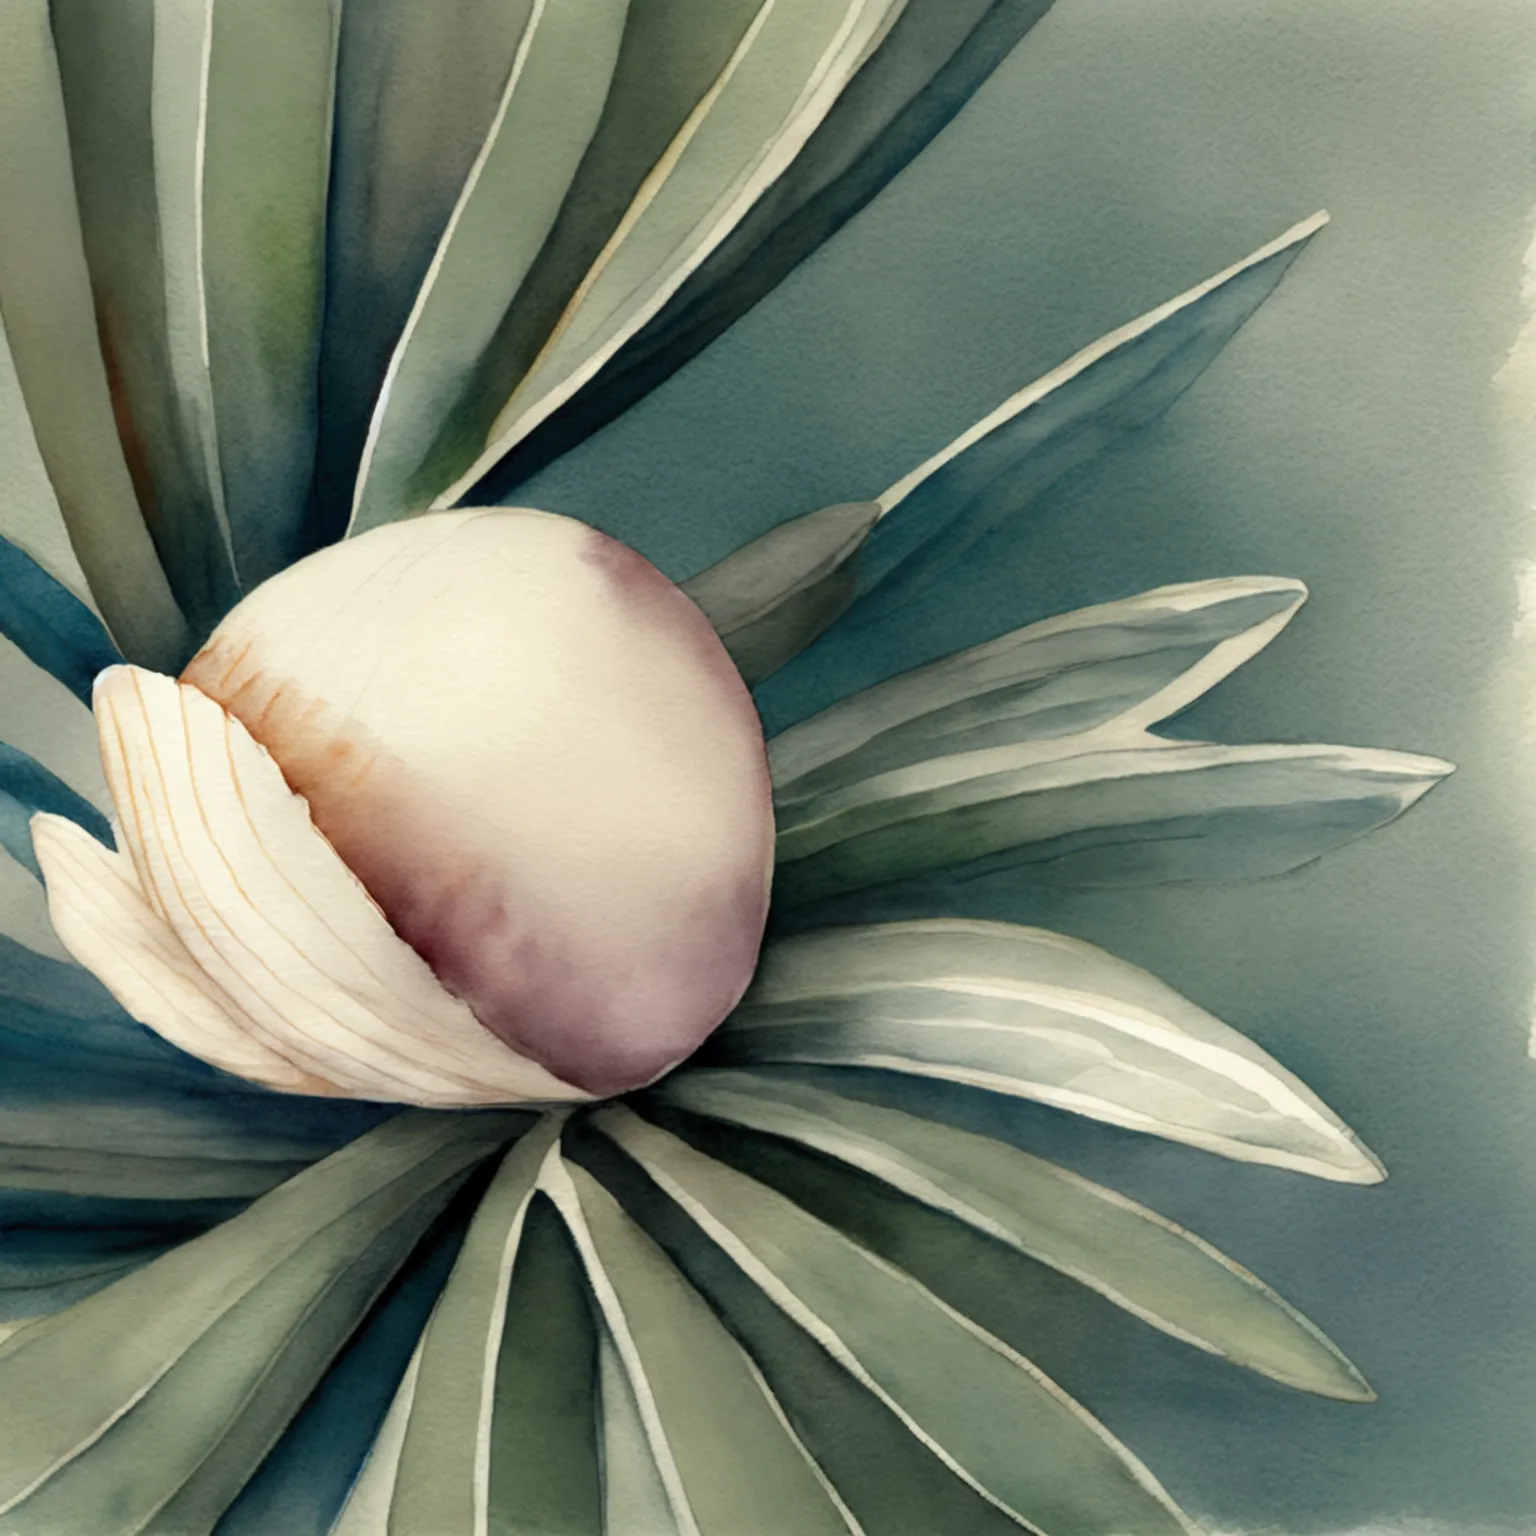 A delicate watercolor depiction of a minimalist seashell, capturing its clean, curved lines and soft, muted colors.